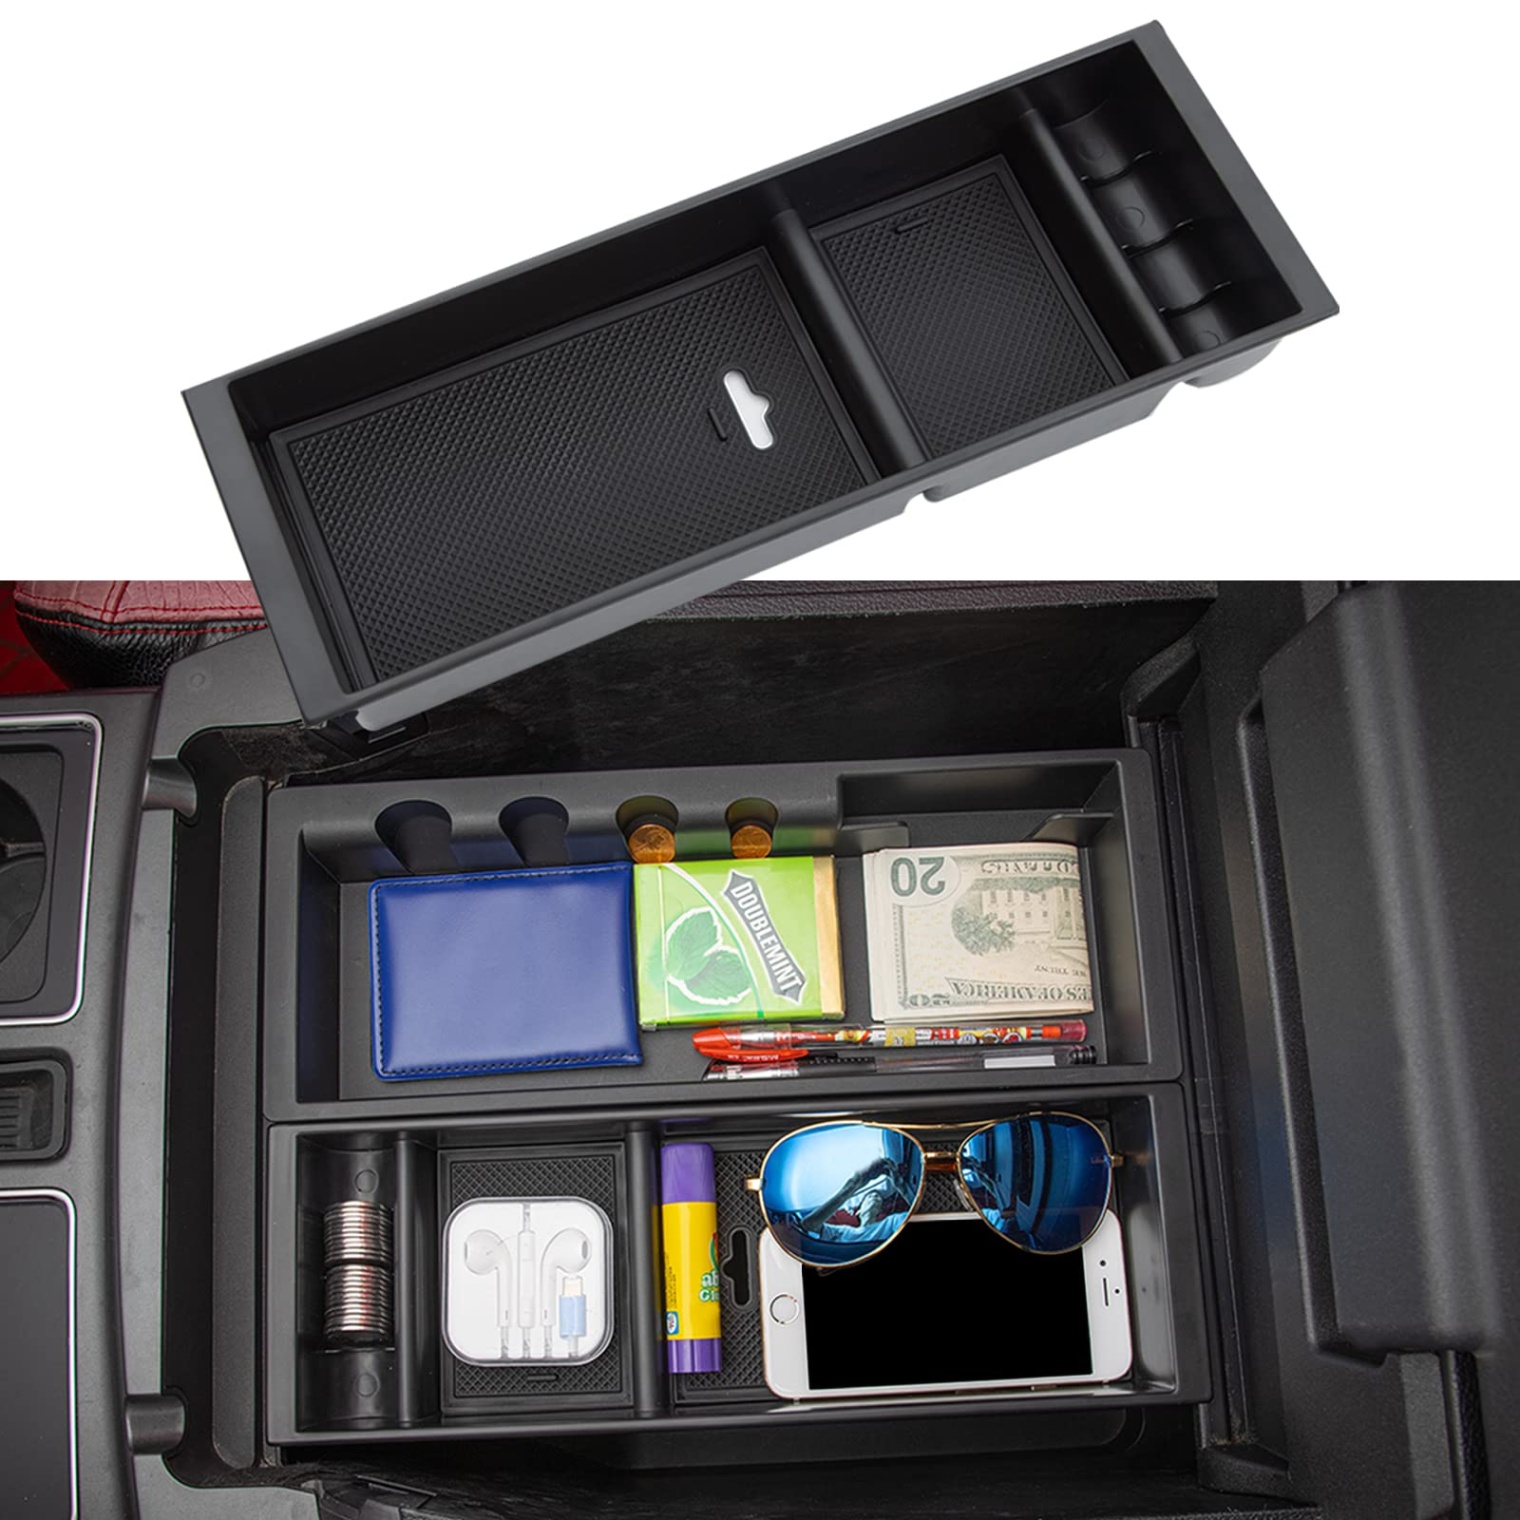 accessories for f150 ford Bulan 2 JDMCAR Center Console Organizer Compatible with Ford F Accessories     ,Center Console tray for F- Interior Accessories, Matte